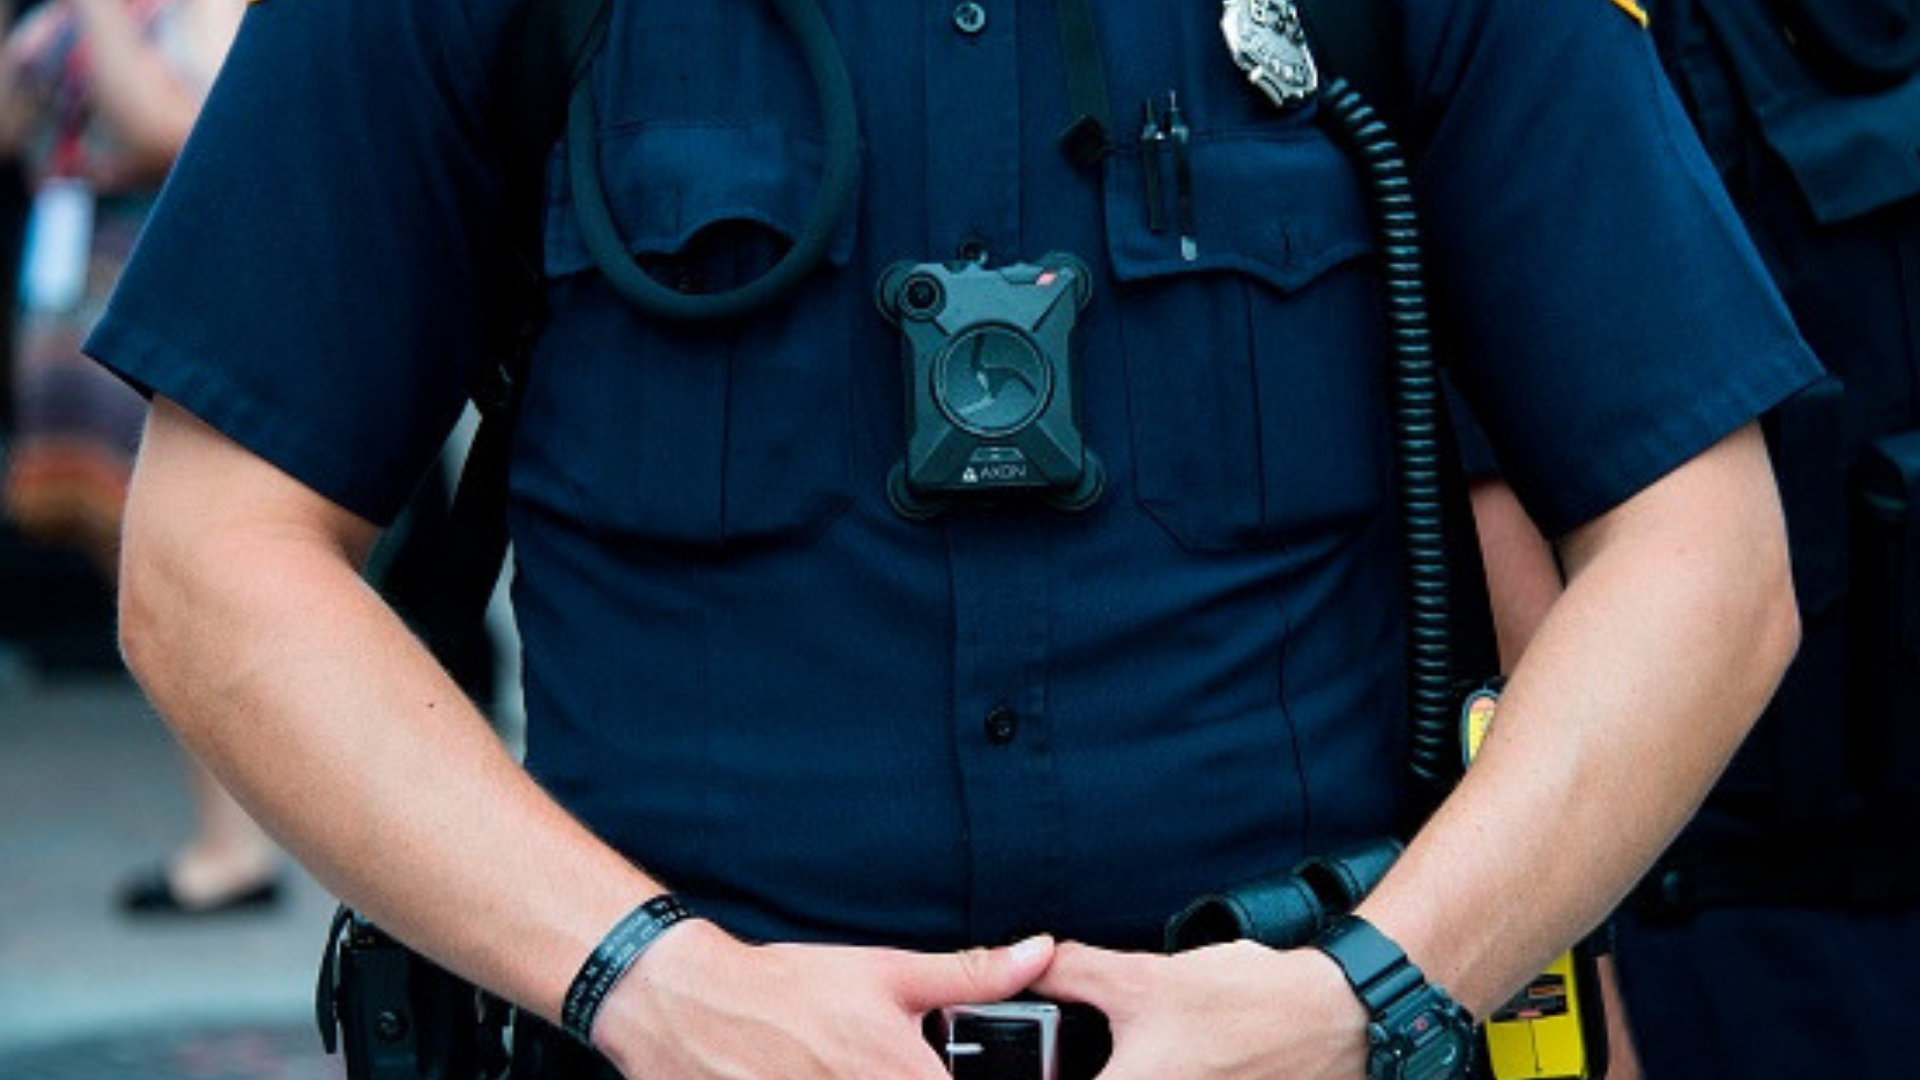 City leaders will start to research body cameras and how to purchase the tools for all officers.